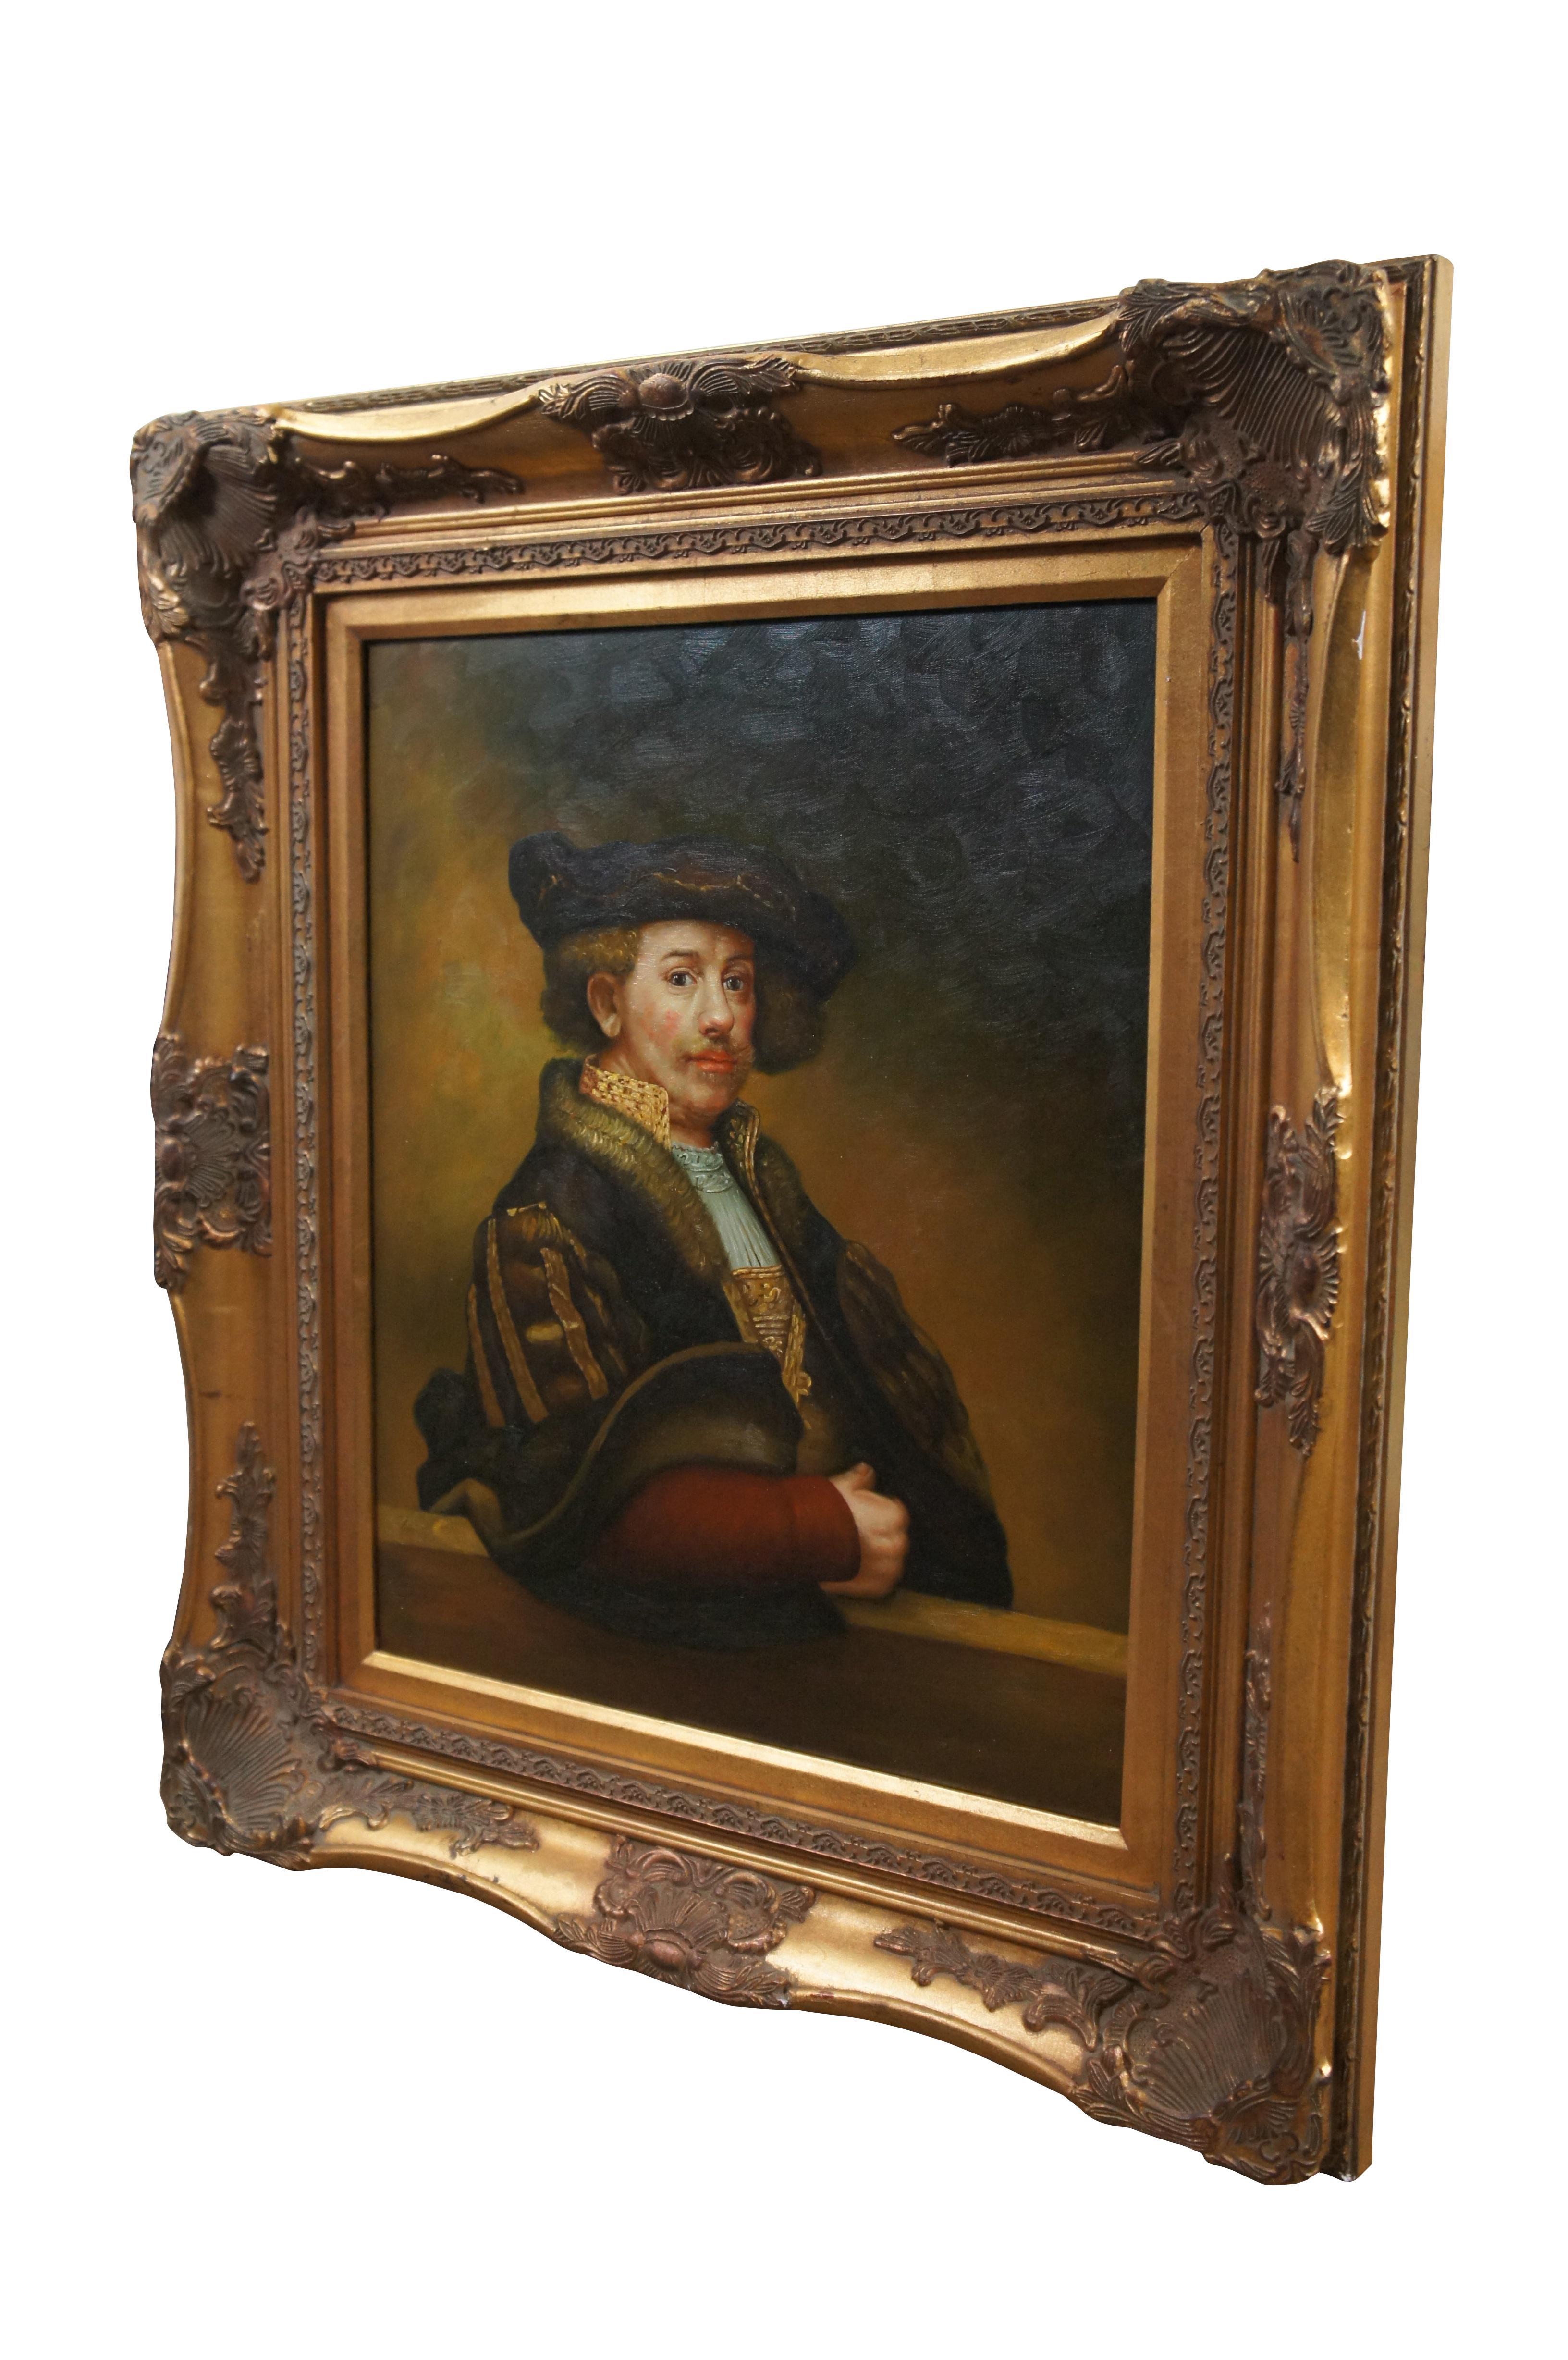 Vintage reproduction oil painting on canvas of Rembrandt at age 34.  Originally painted in the 17th century, these self portraits were created by the artist looking at himself in a mirror, and the paintings and drawings therefore reverse his actual